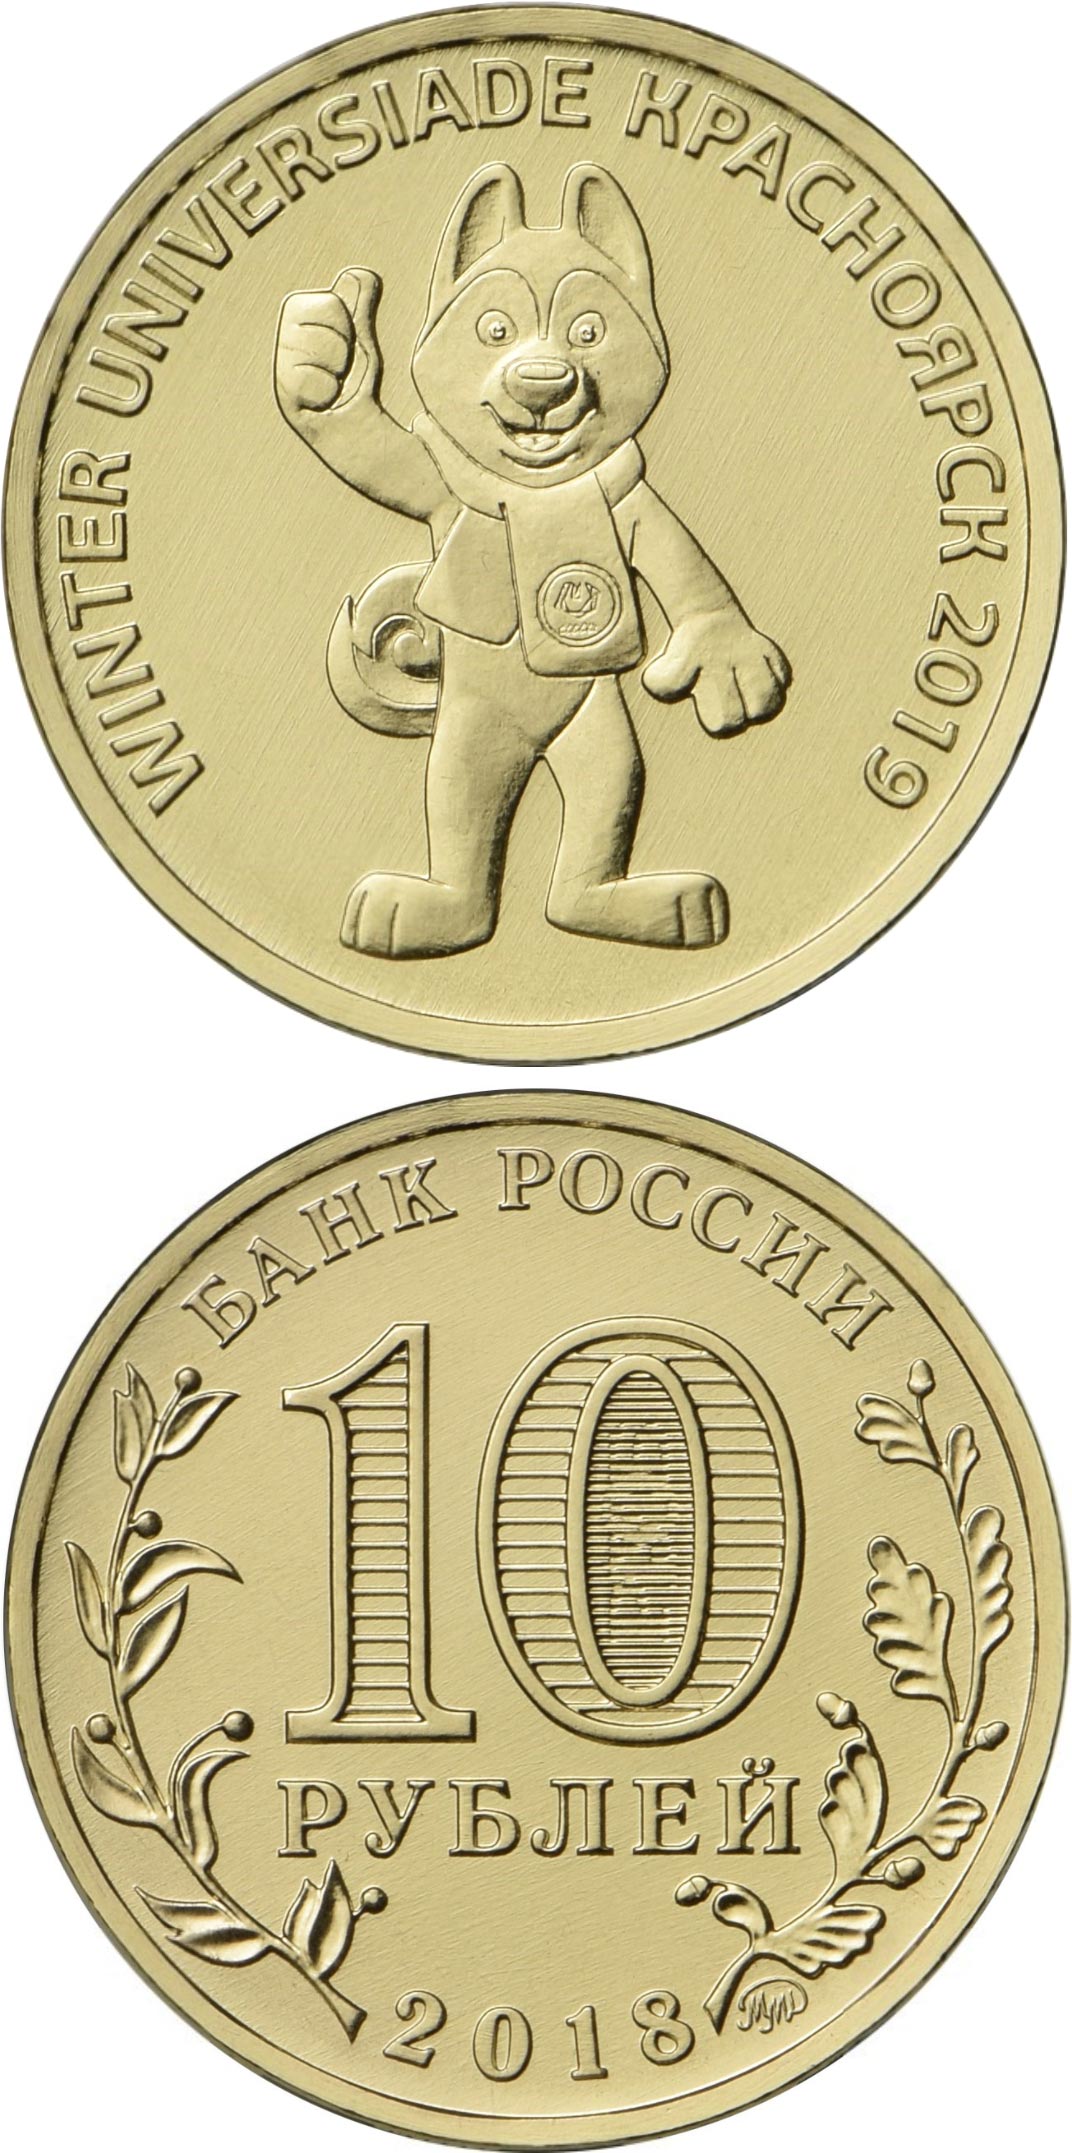 10 rubles coin - The 29th Winter Universiade of 2019 in the city of